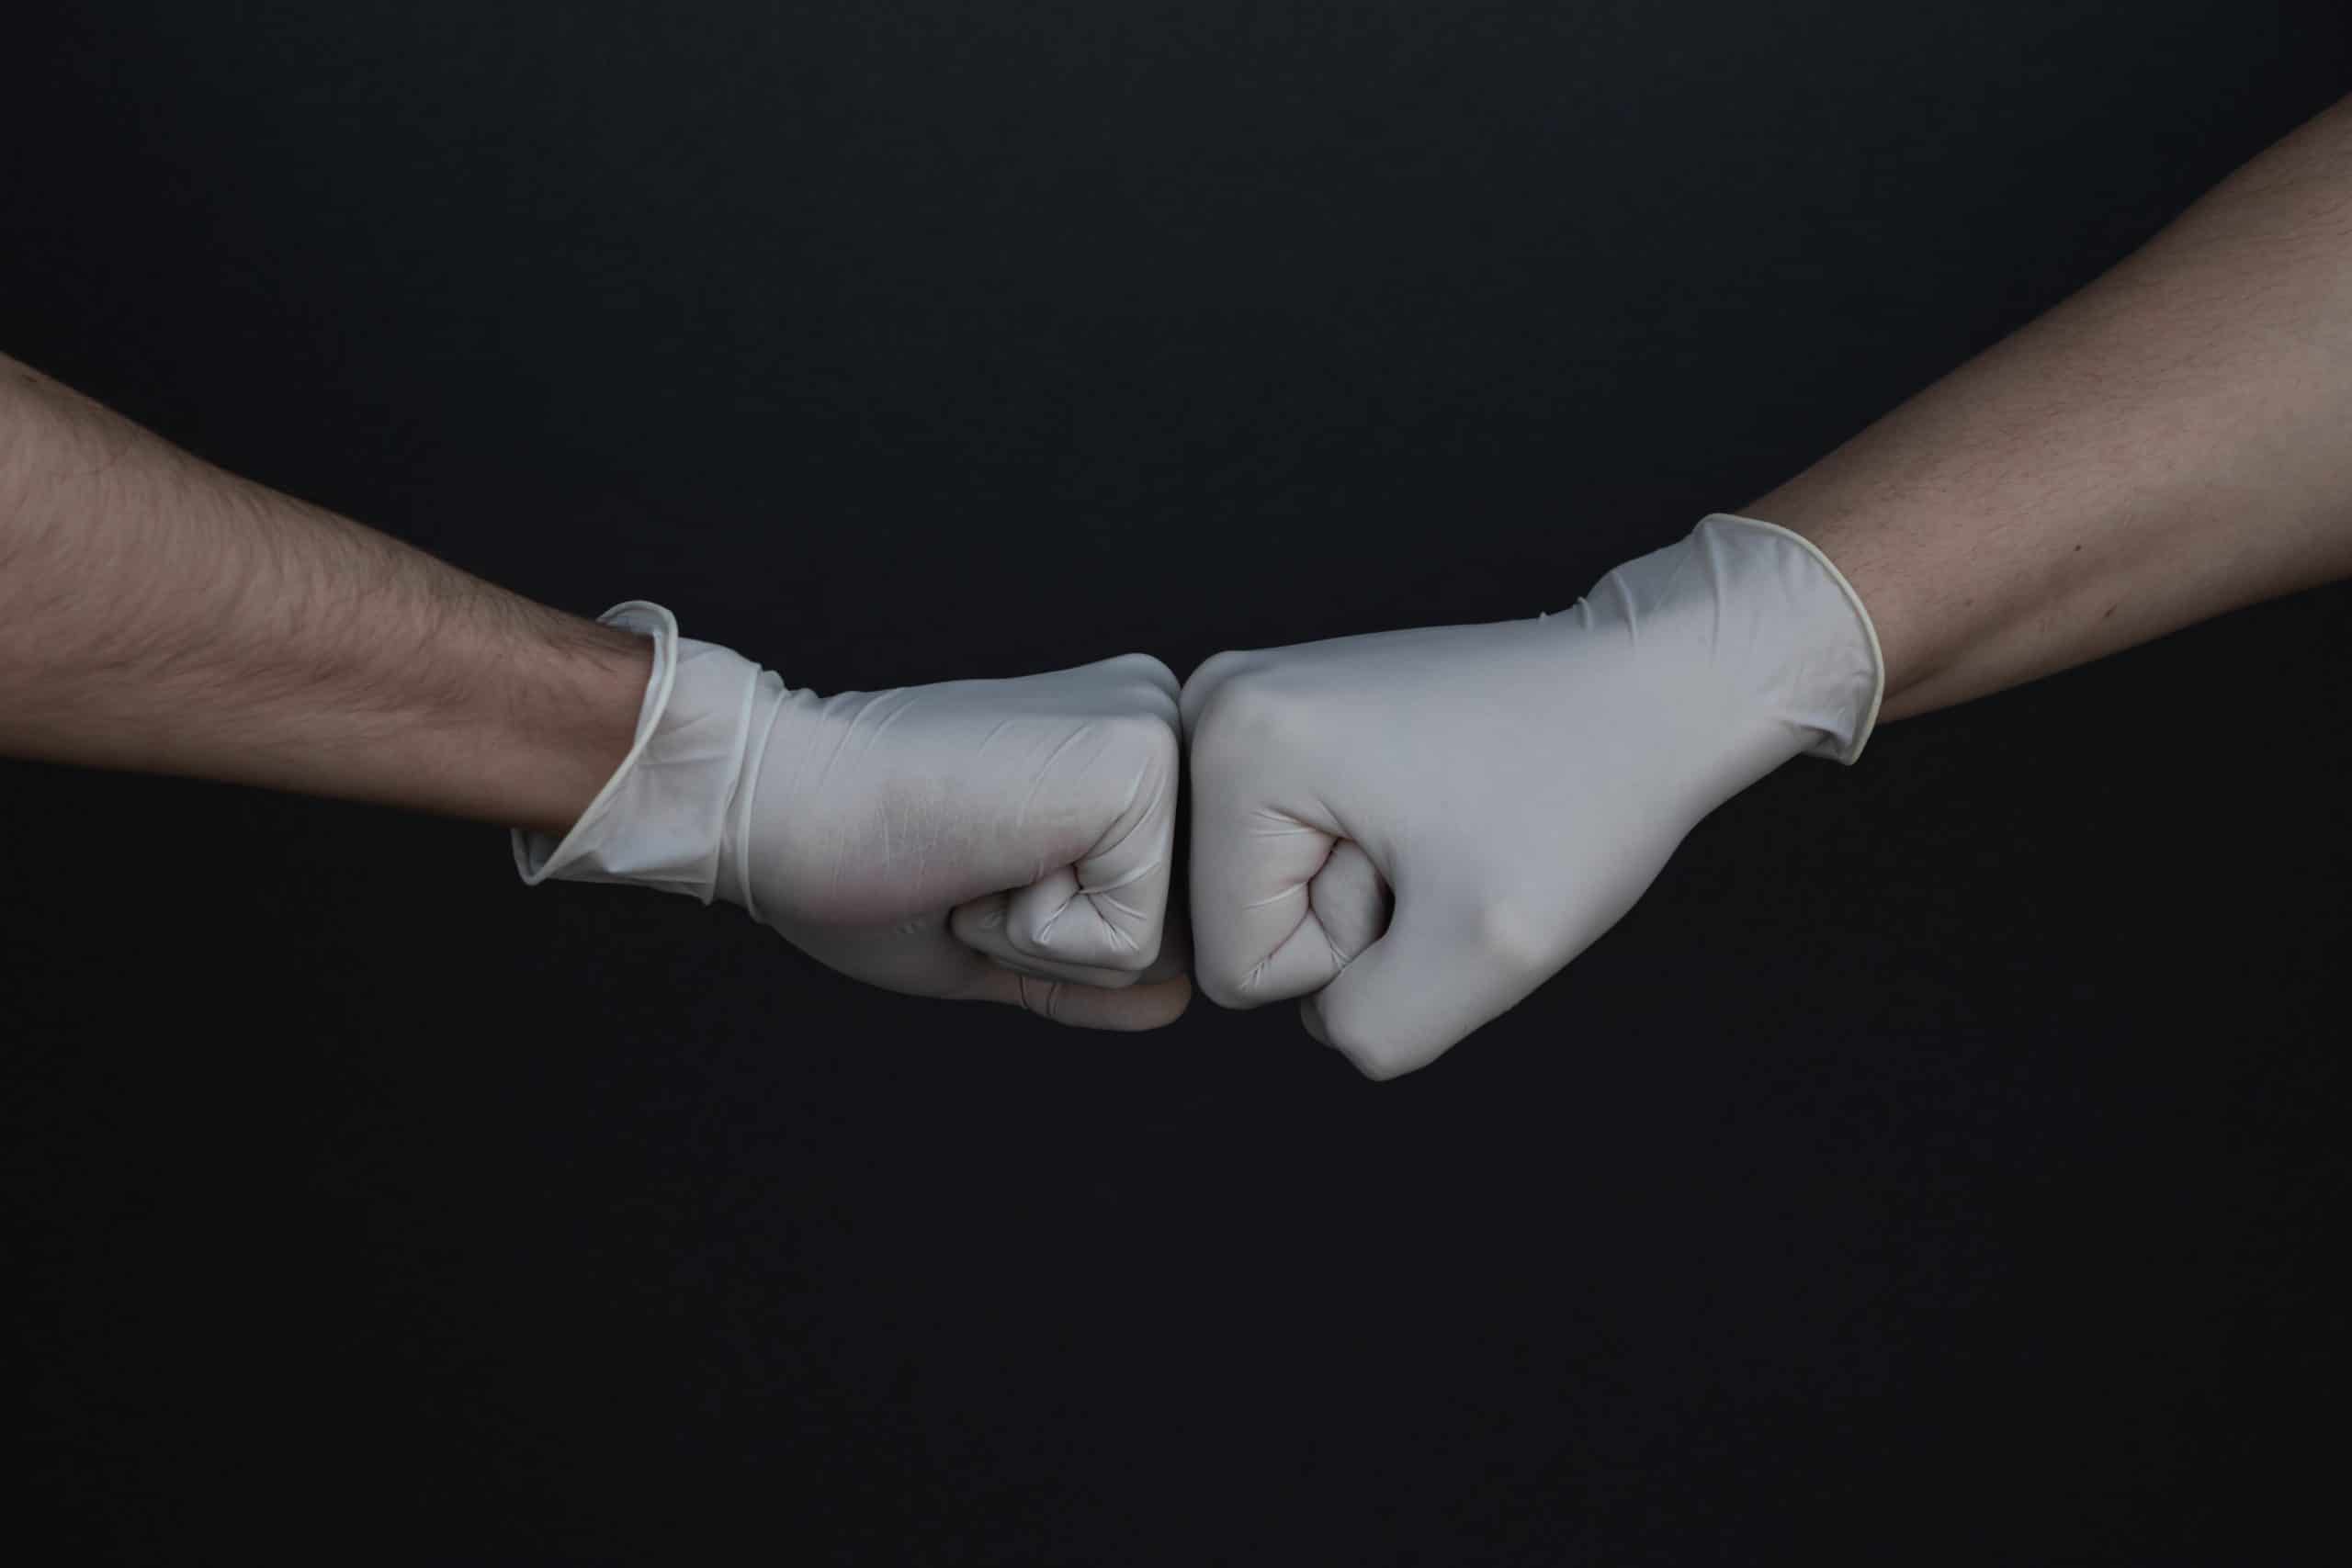 Mstore hand protection glove image